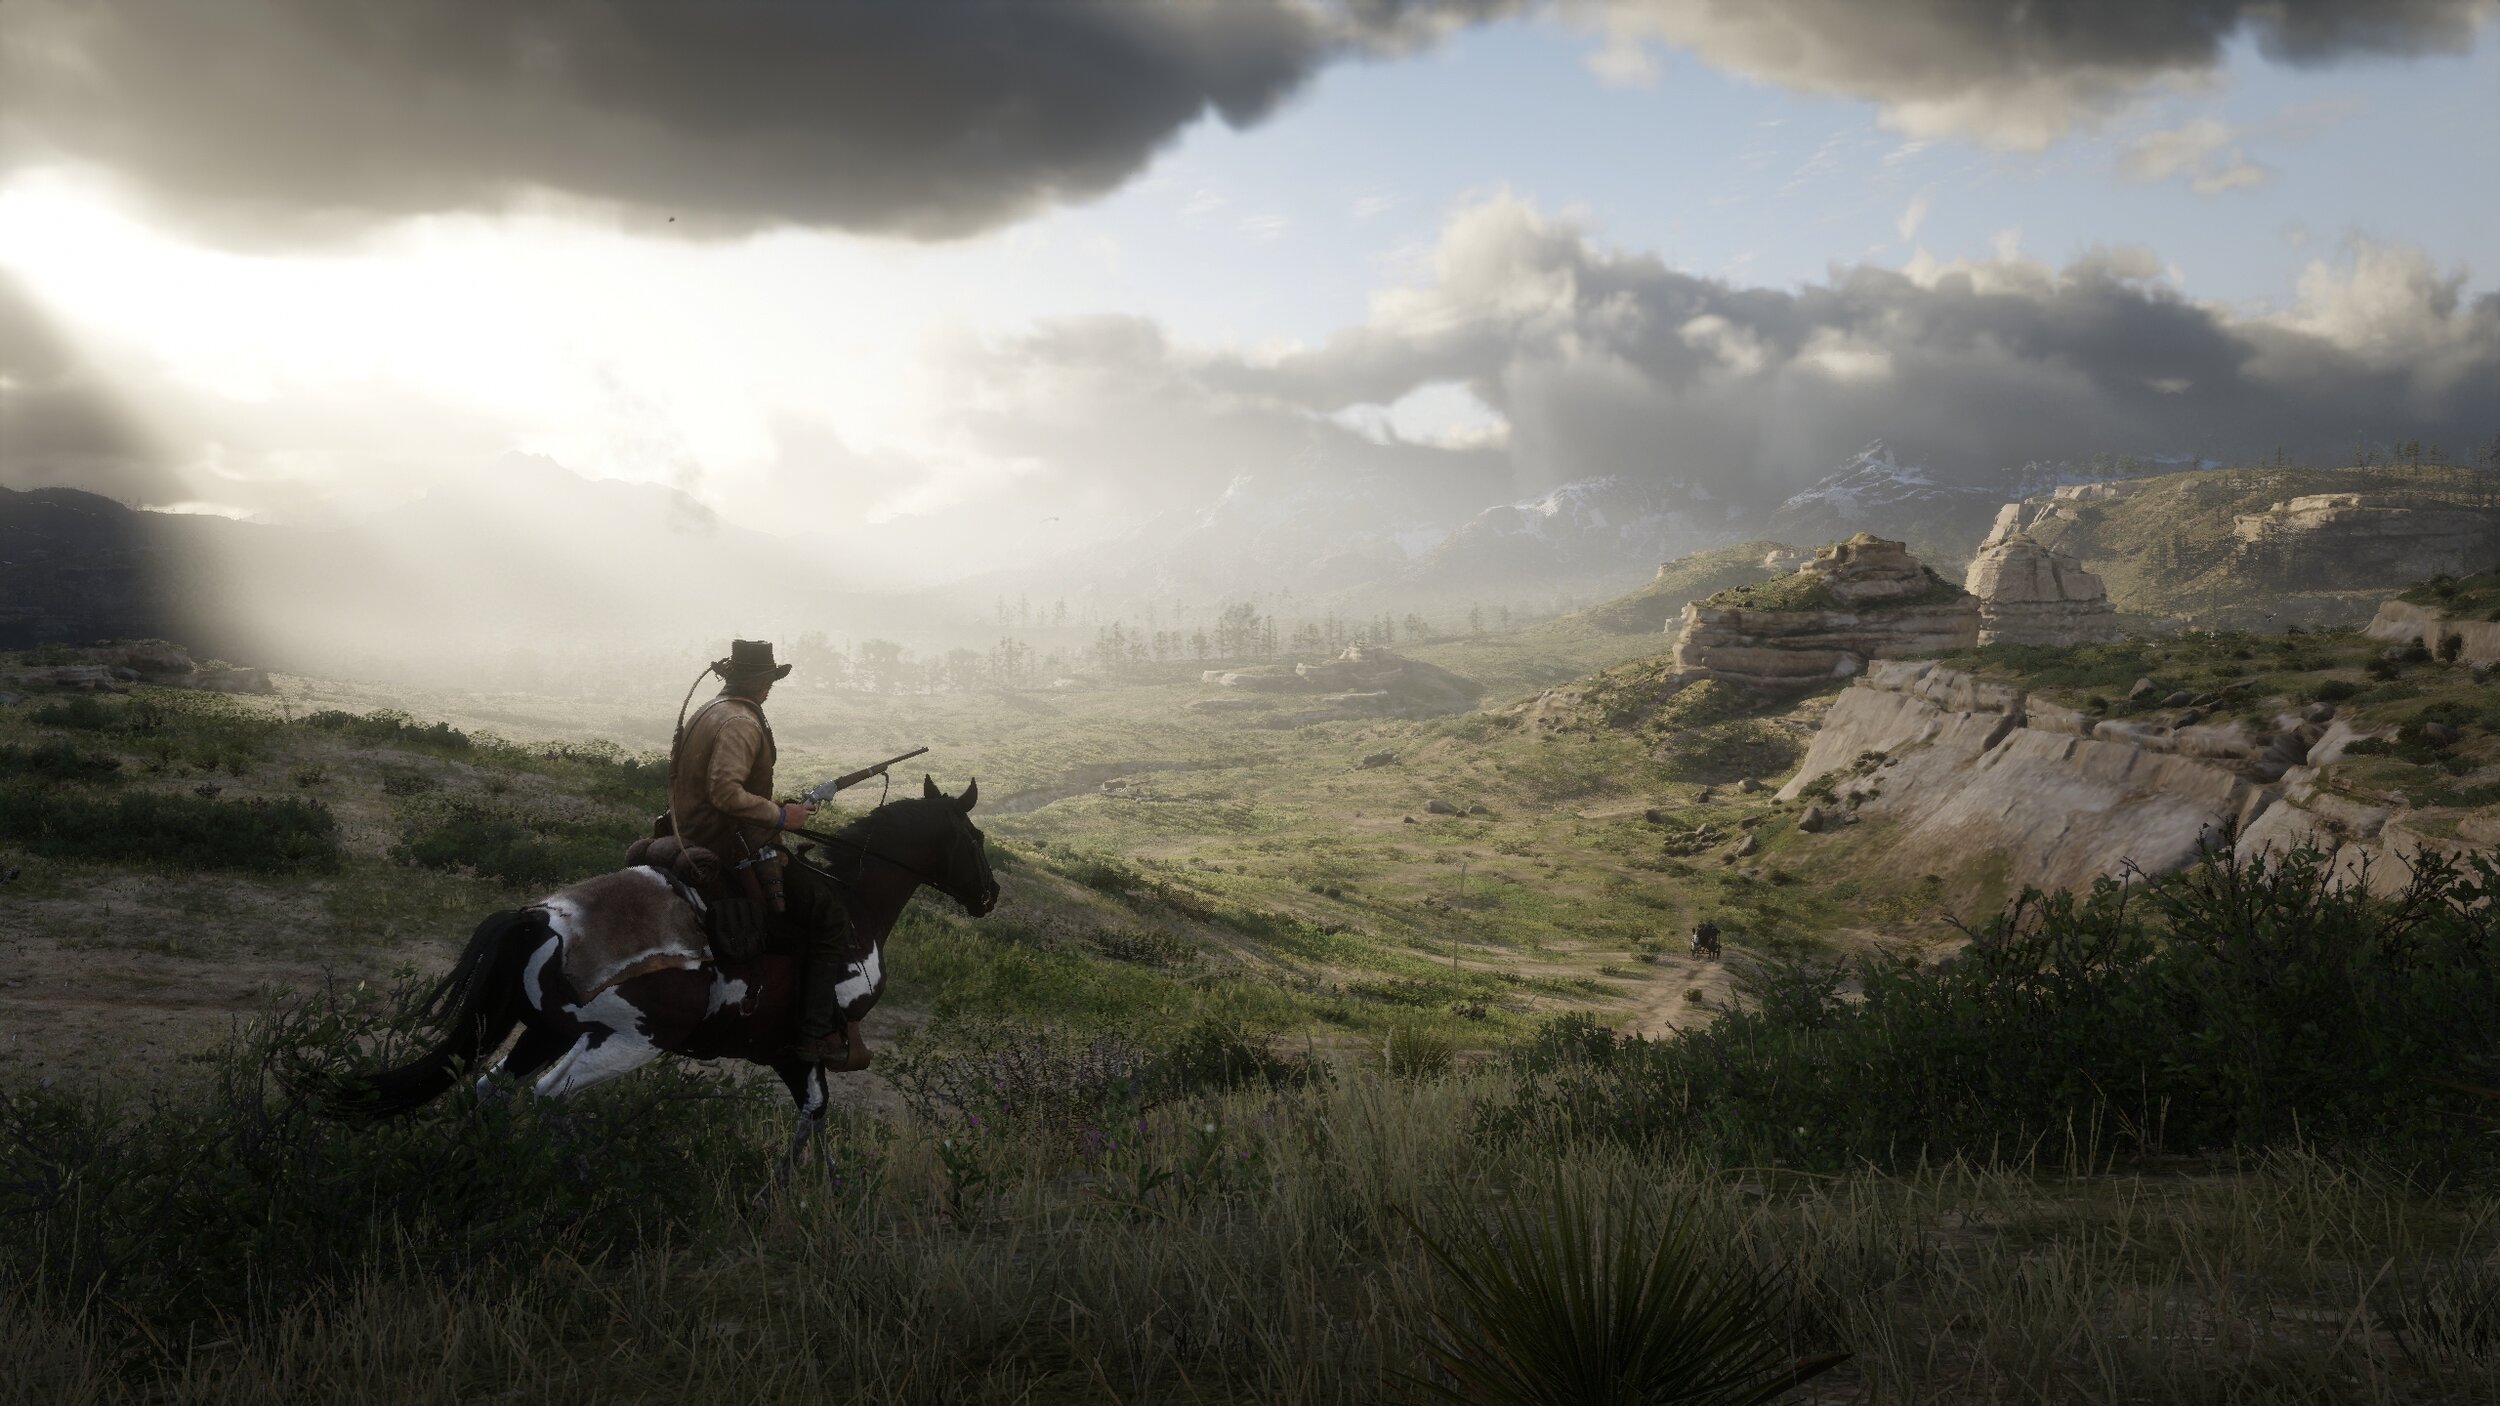 Red Dead Redemption 2 PC settings guide: How to get the best